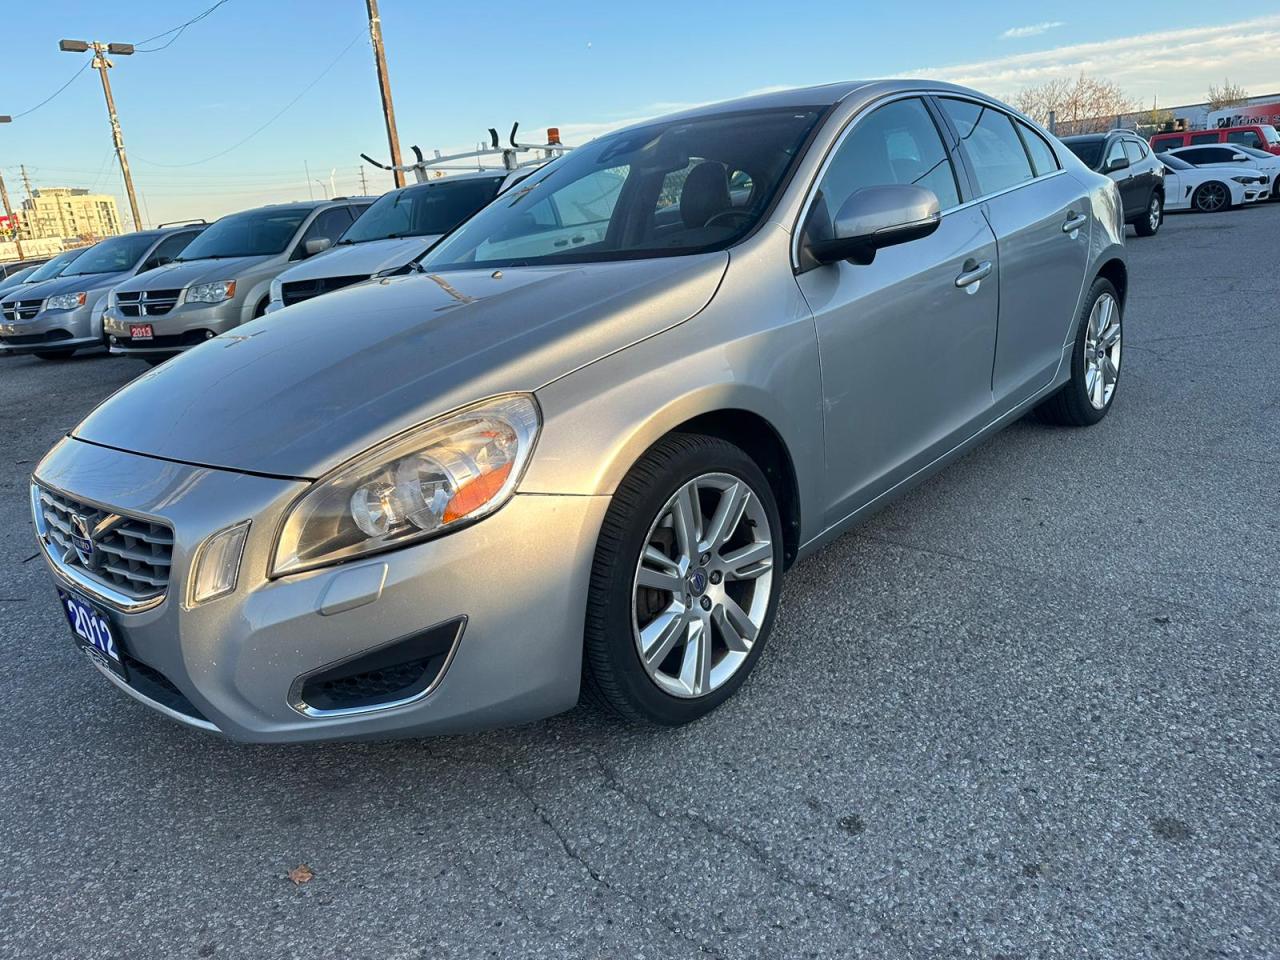 2012 Volvo S60 T5 certified with 3 years warranty included. - Photo #13